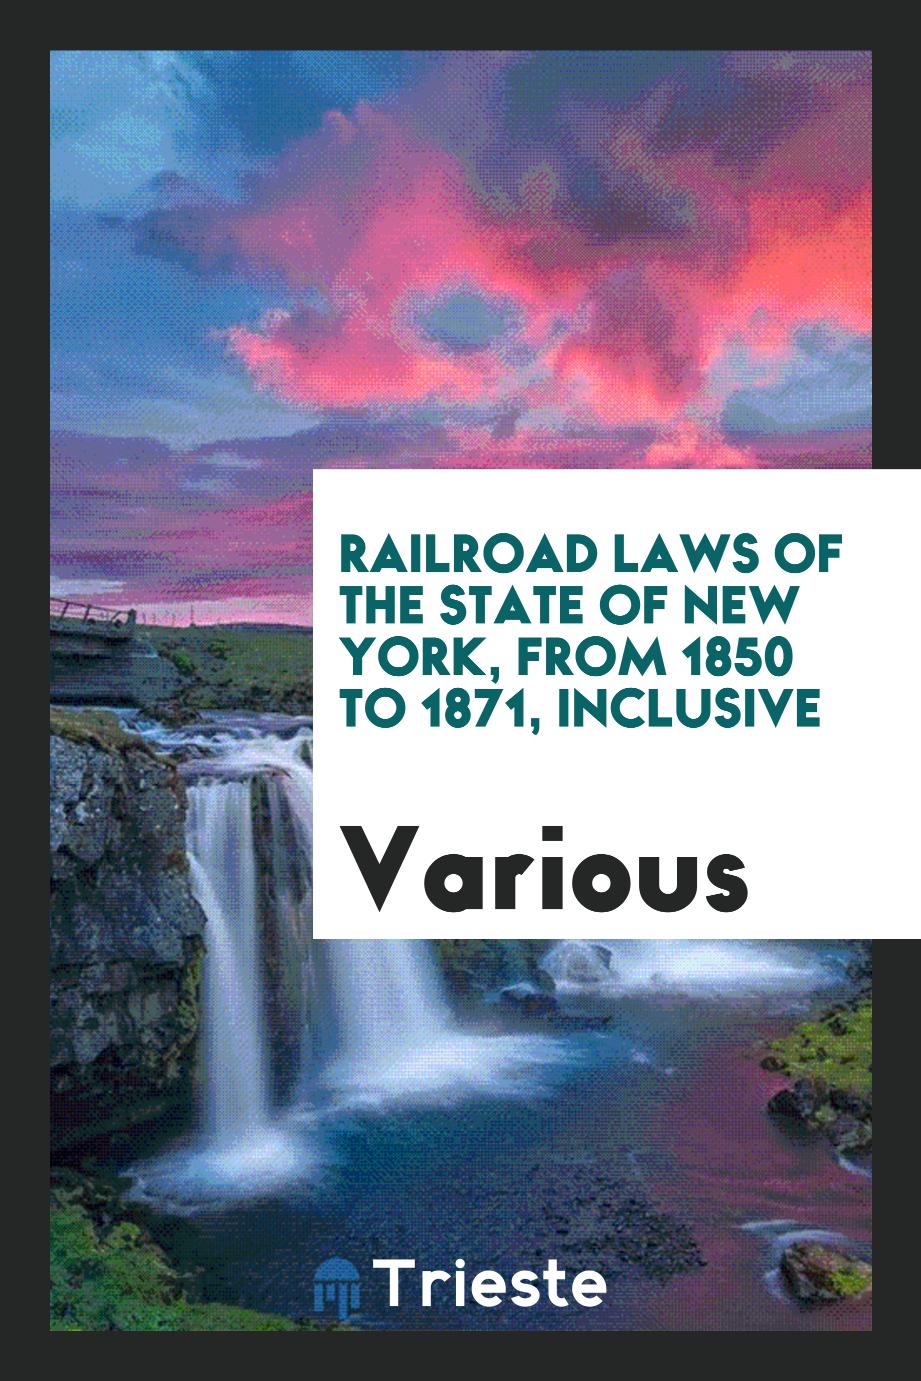 Railroad Laws of the State of New York, from 1850 to 1871, Inclusive